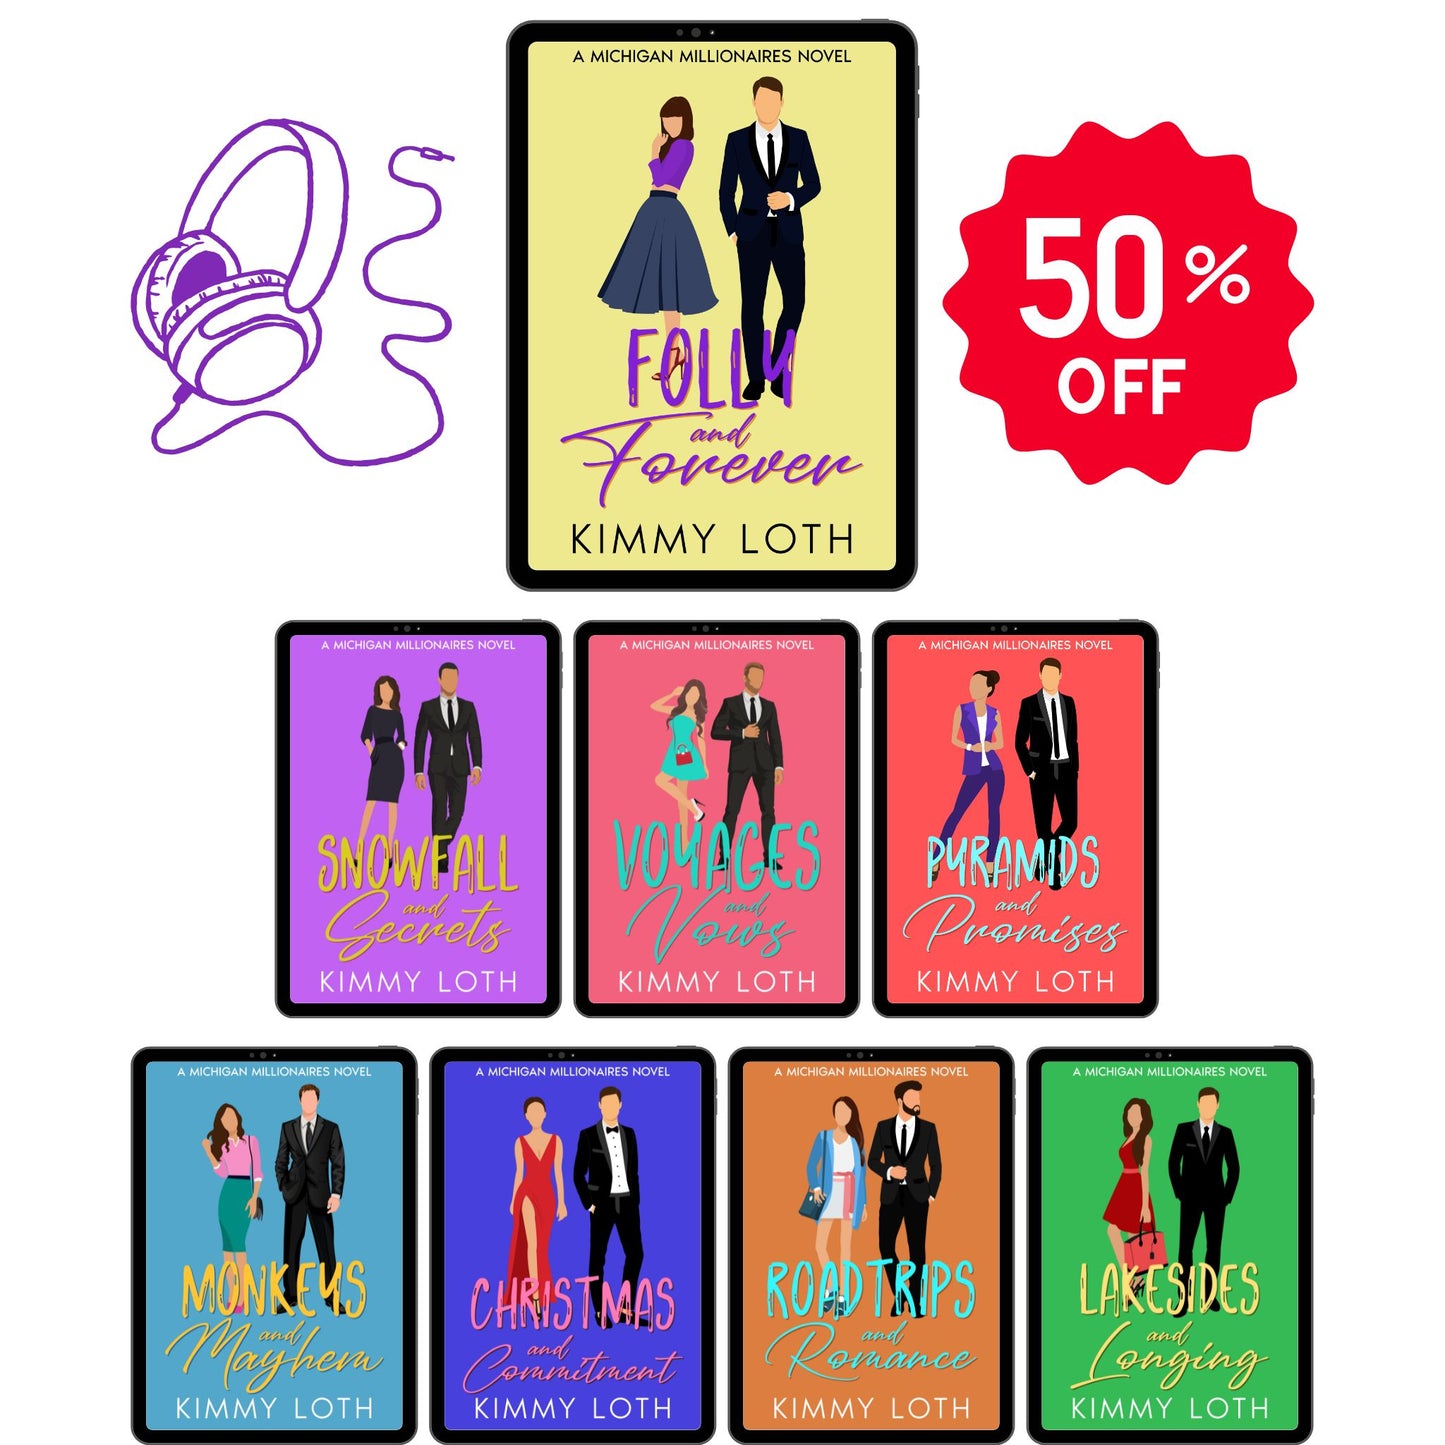 Ultimate Book Bundle Featuring Roadtrips and Romance